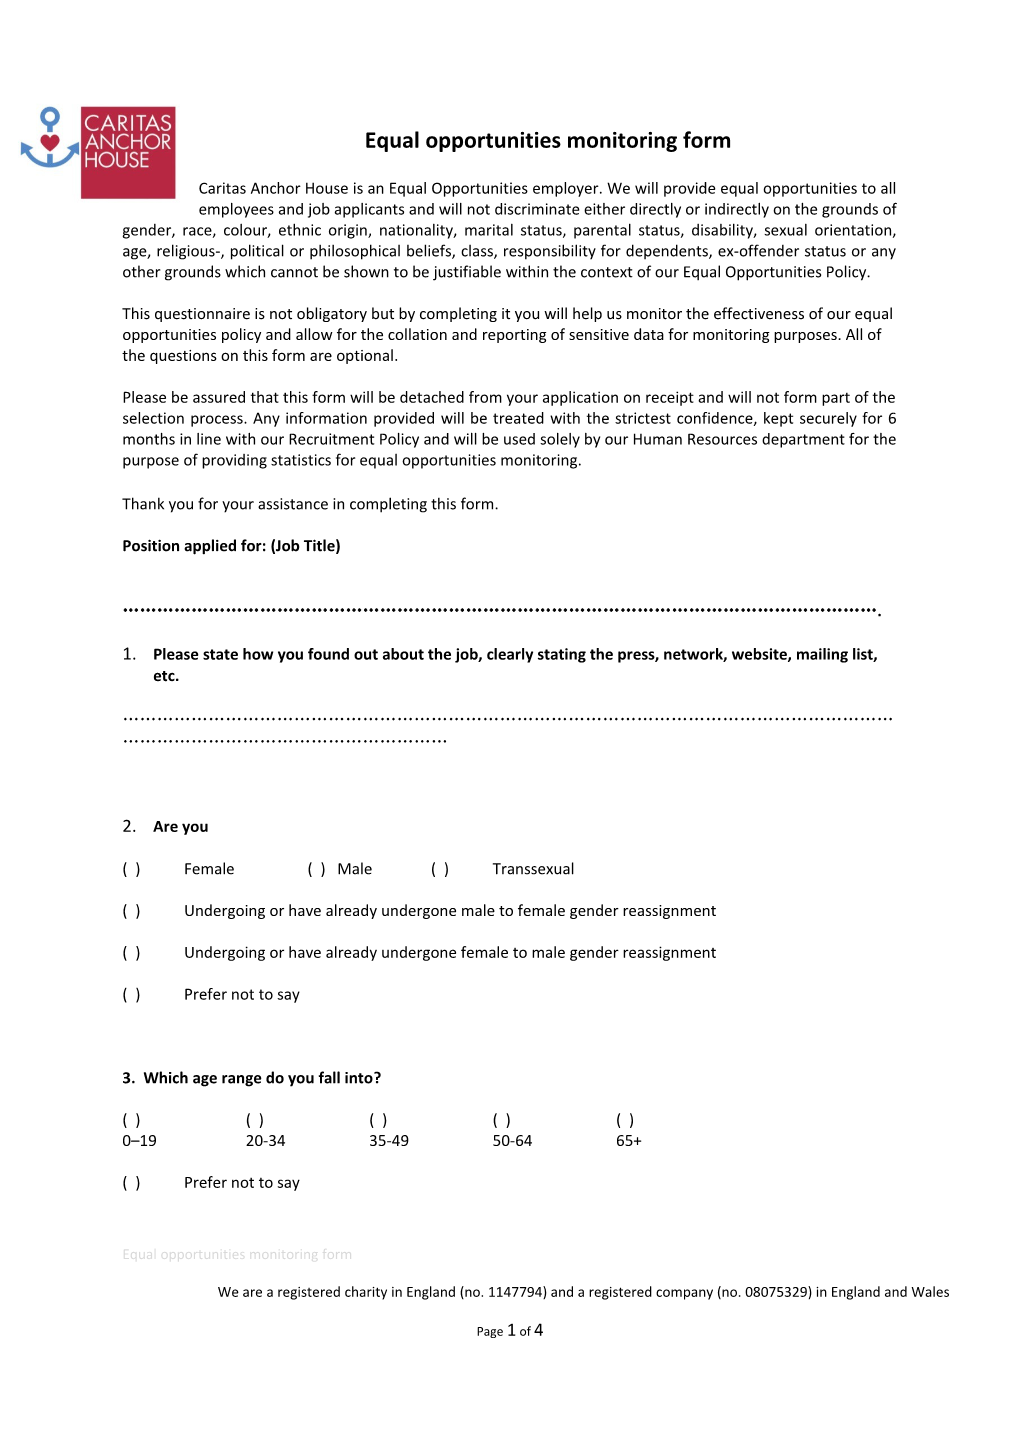 Equal Opportunities Monitoring Form s3